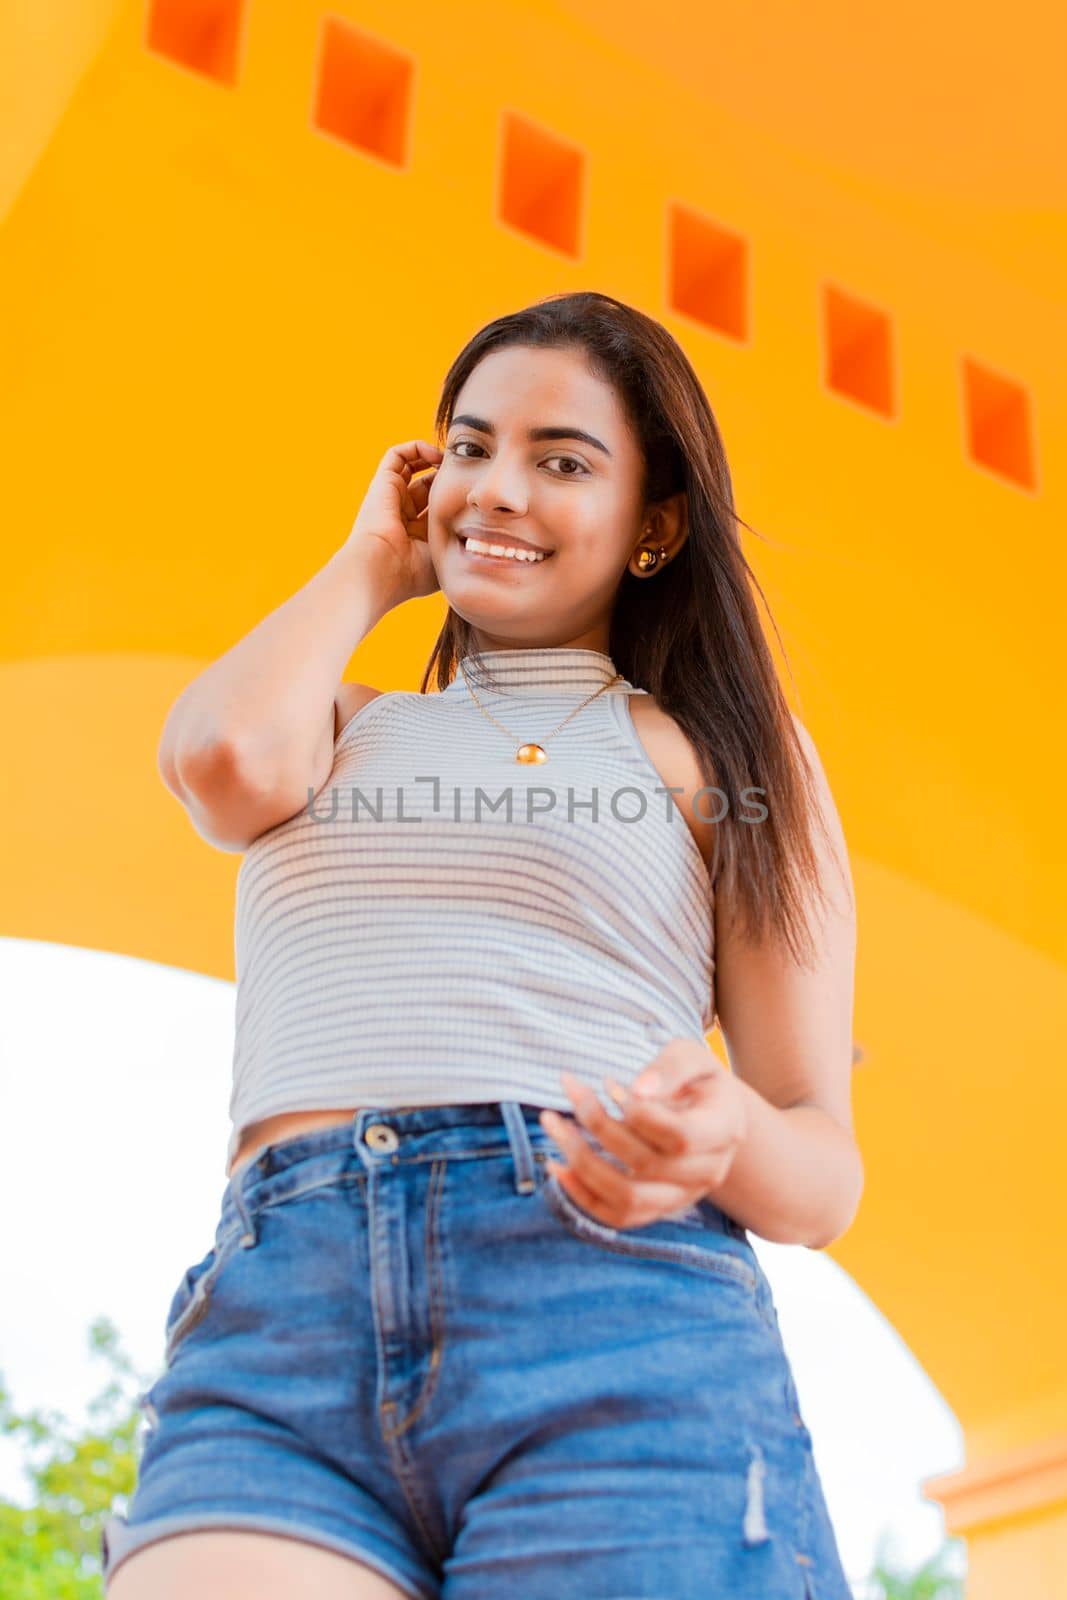 Portrait of attractive Latin girl outdoors. Smiling latin young woman looking at camera outdoors. Low angle of a cute and smiling Latin girl outdoors. Latin people portrait concept